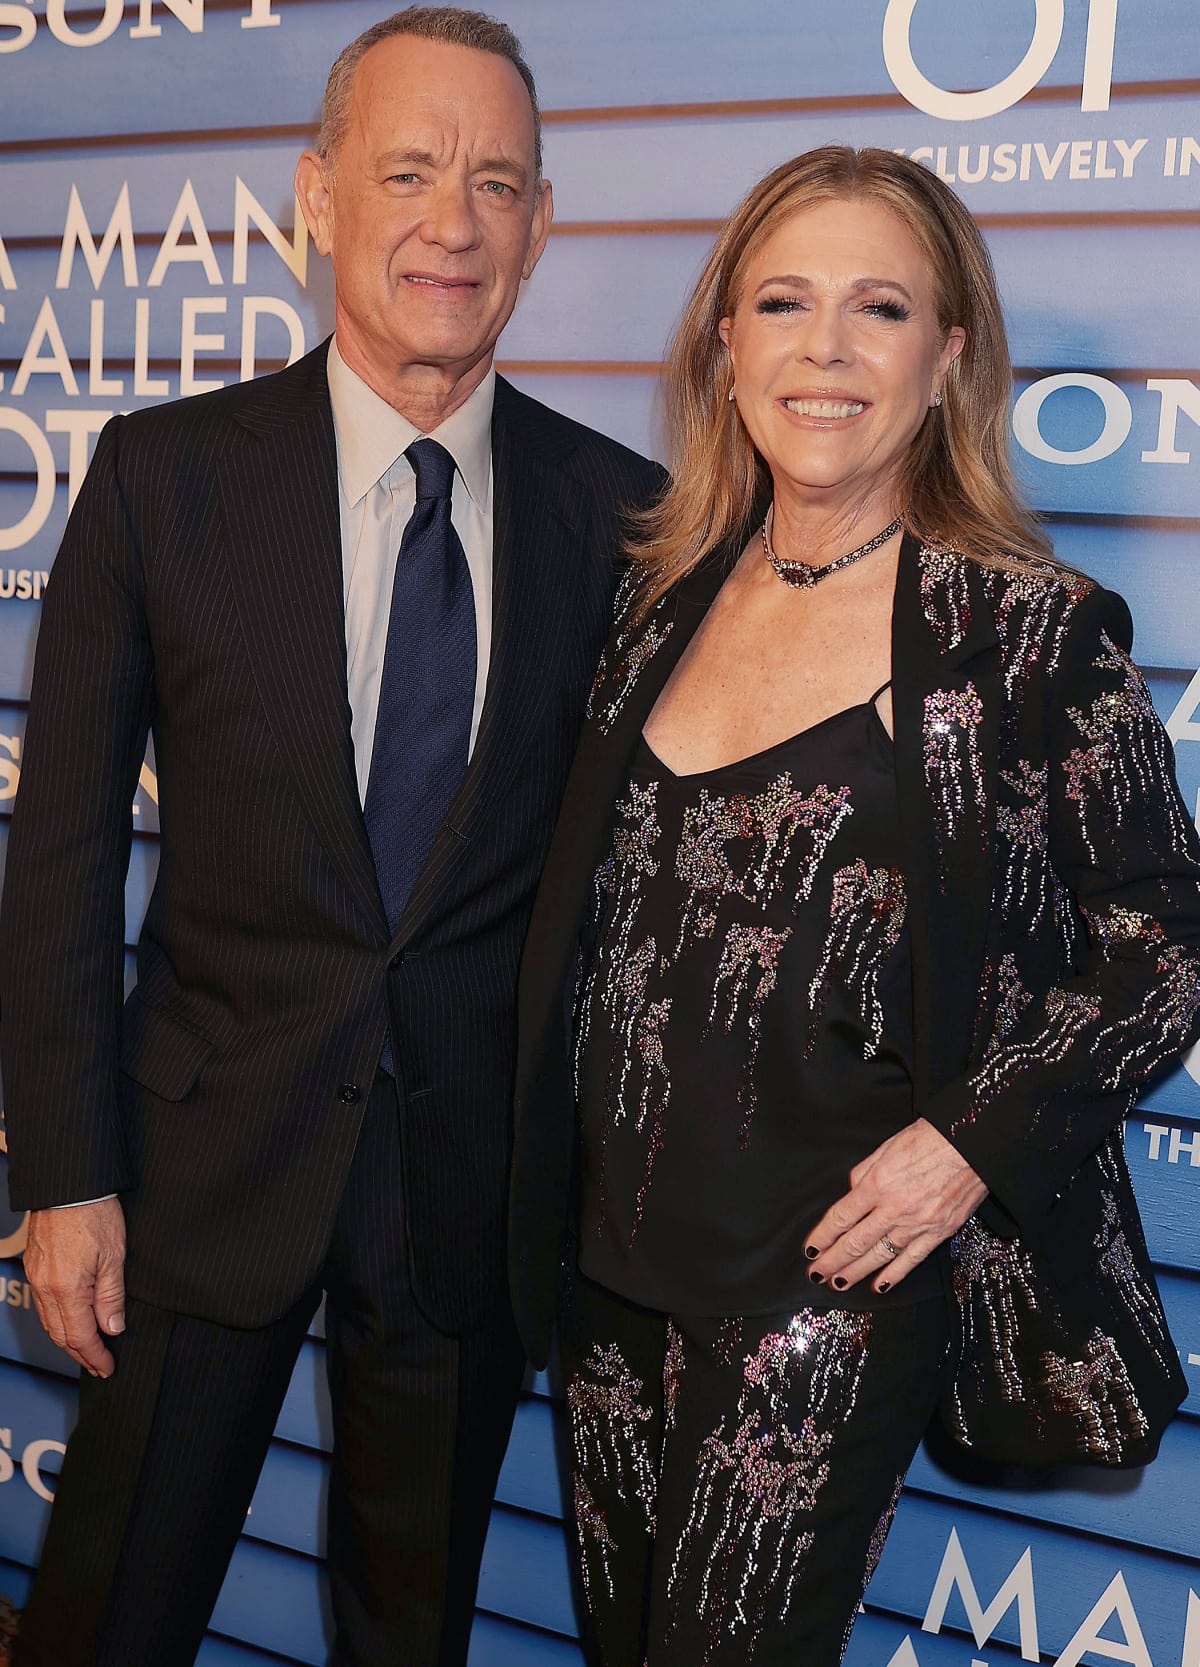 Tom Hanks and Rita Wilson at a special screening of “A Man Called Otto”